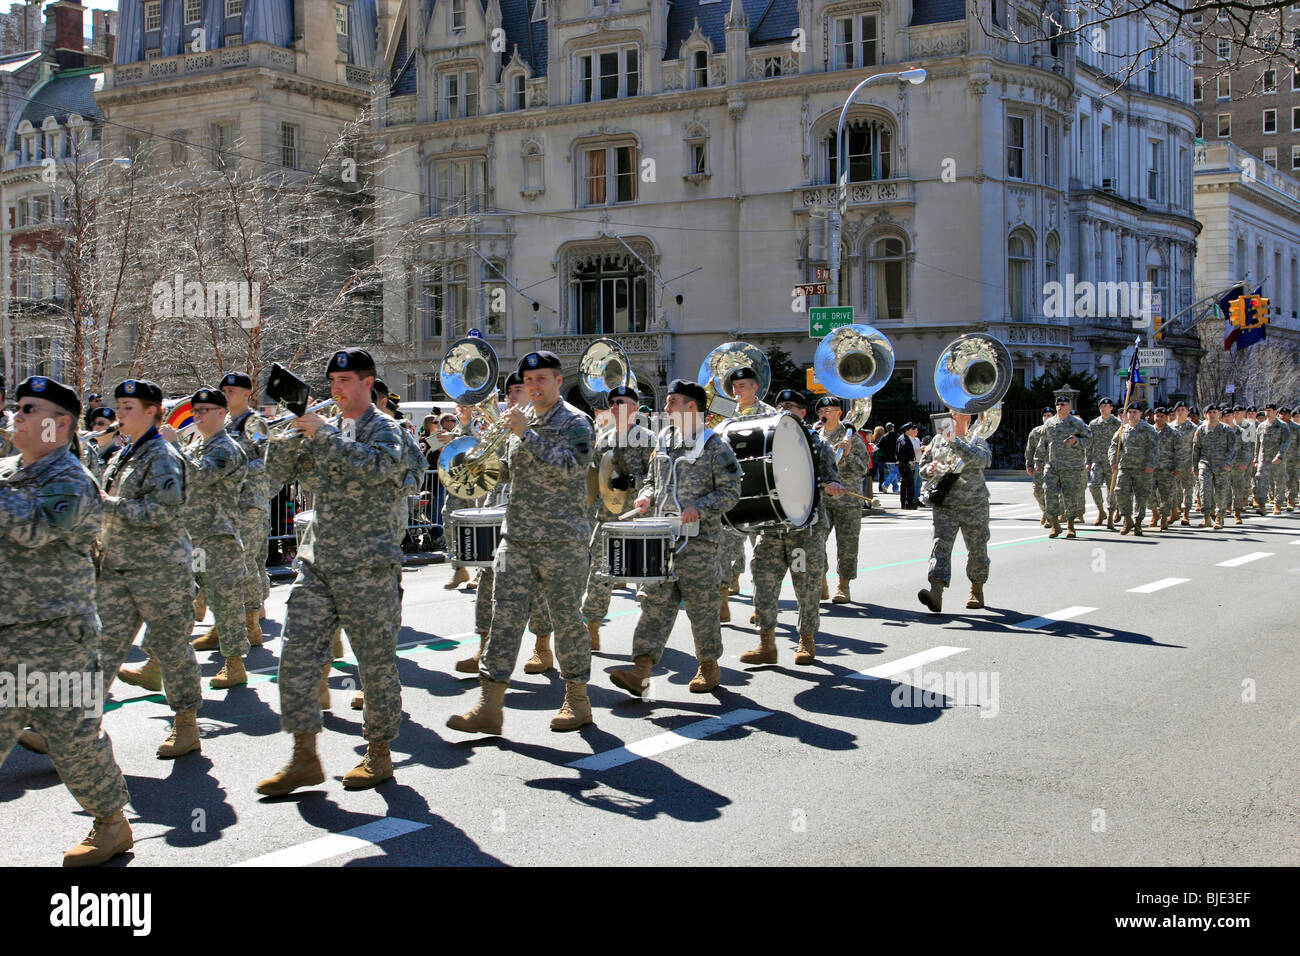 Military marching band marches up 5th Ave. in St. Patrick's Day parade, 5th Ave., Manhattan, New York City Stock Photo